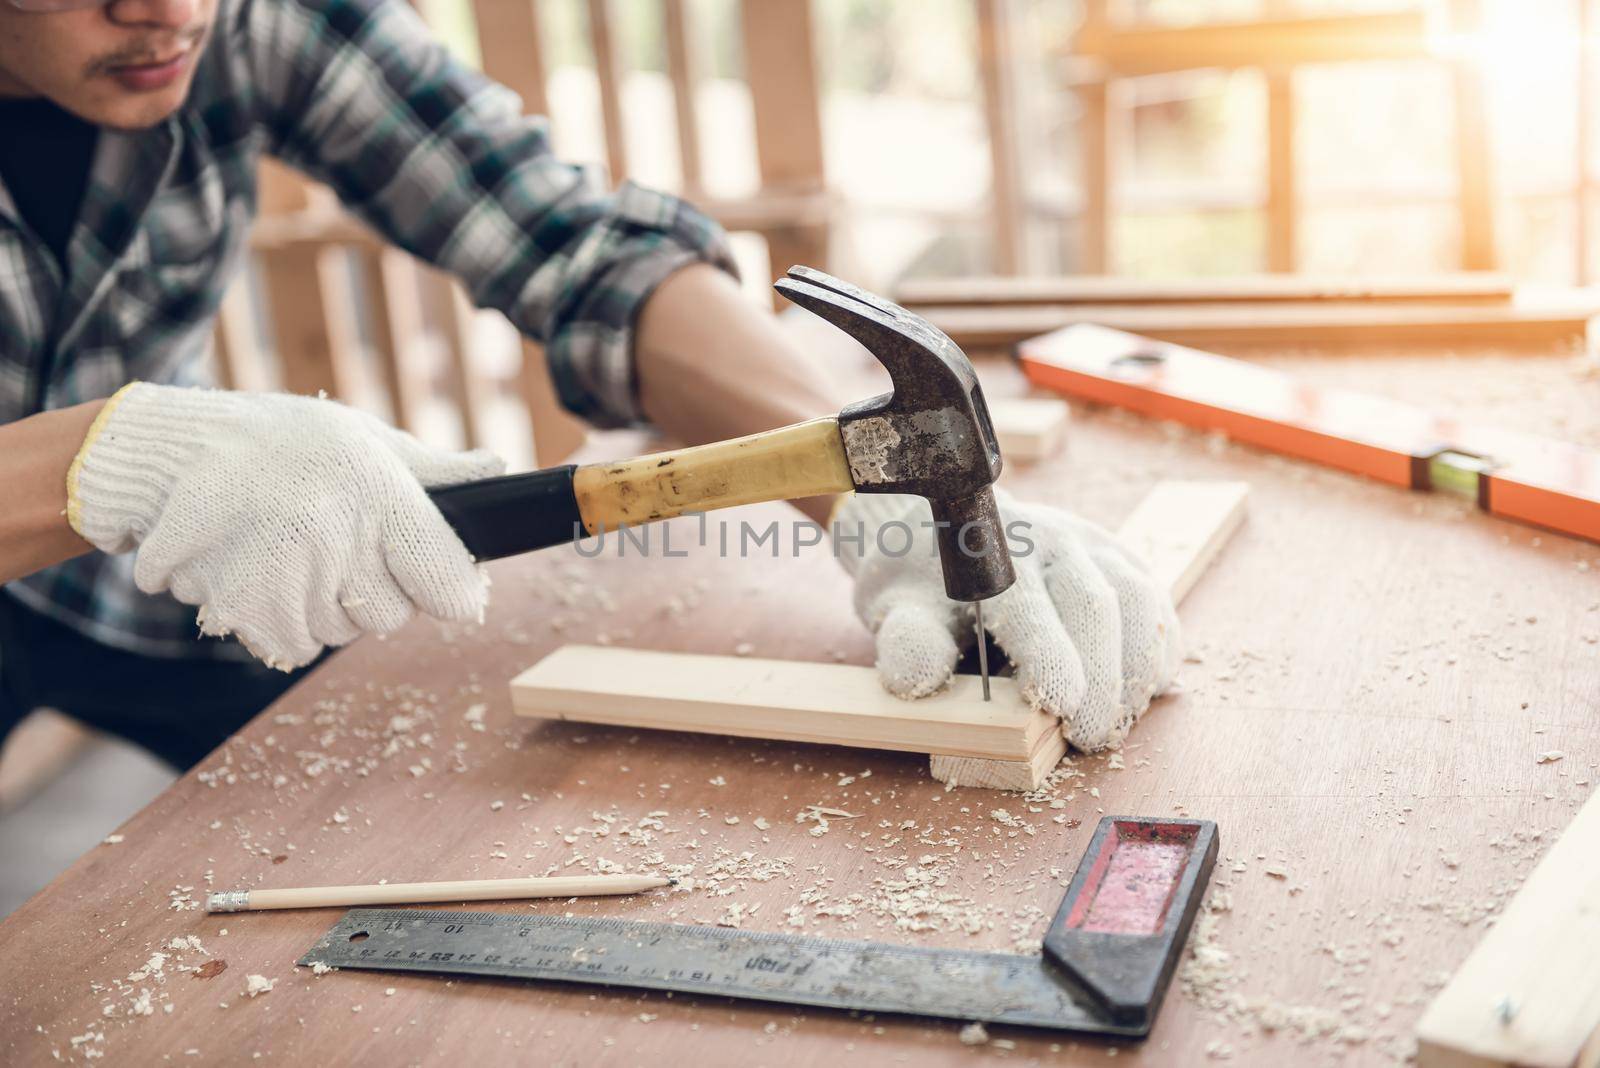 Carpenter Man is Working Timber Woodworking in Carpentry Shop, Craftsman is Hammering a Nail into Timber Frame for Wooden Furniture in Workshop. Workmanship and Job Occupation Concept by MahaHeang245789